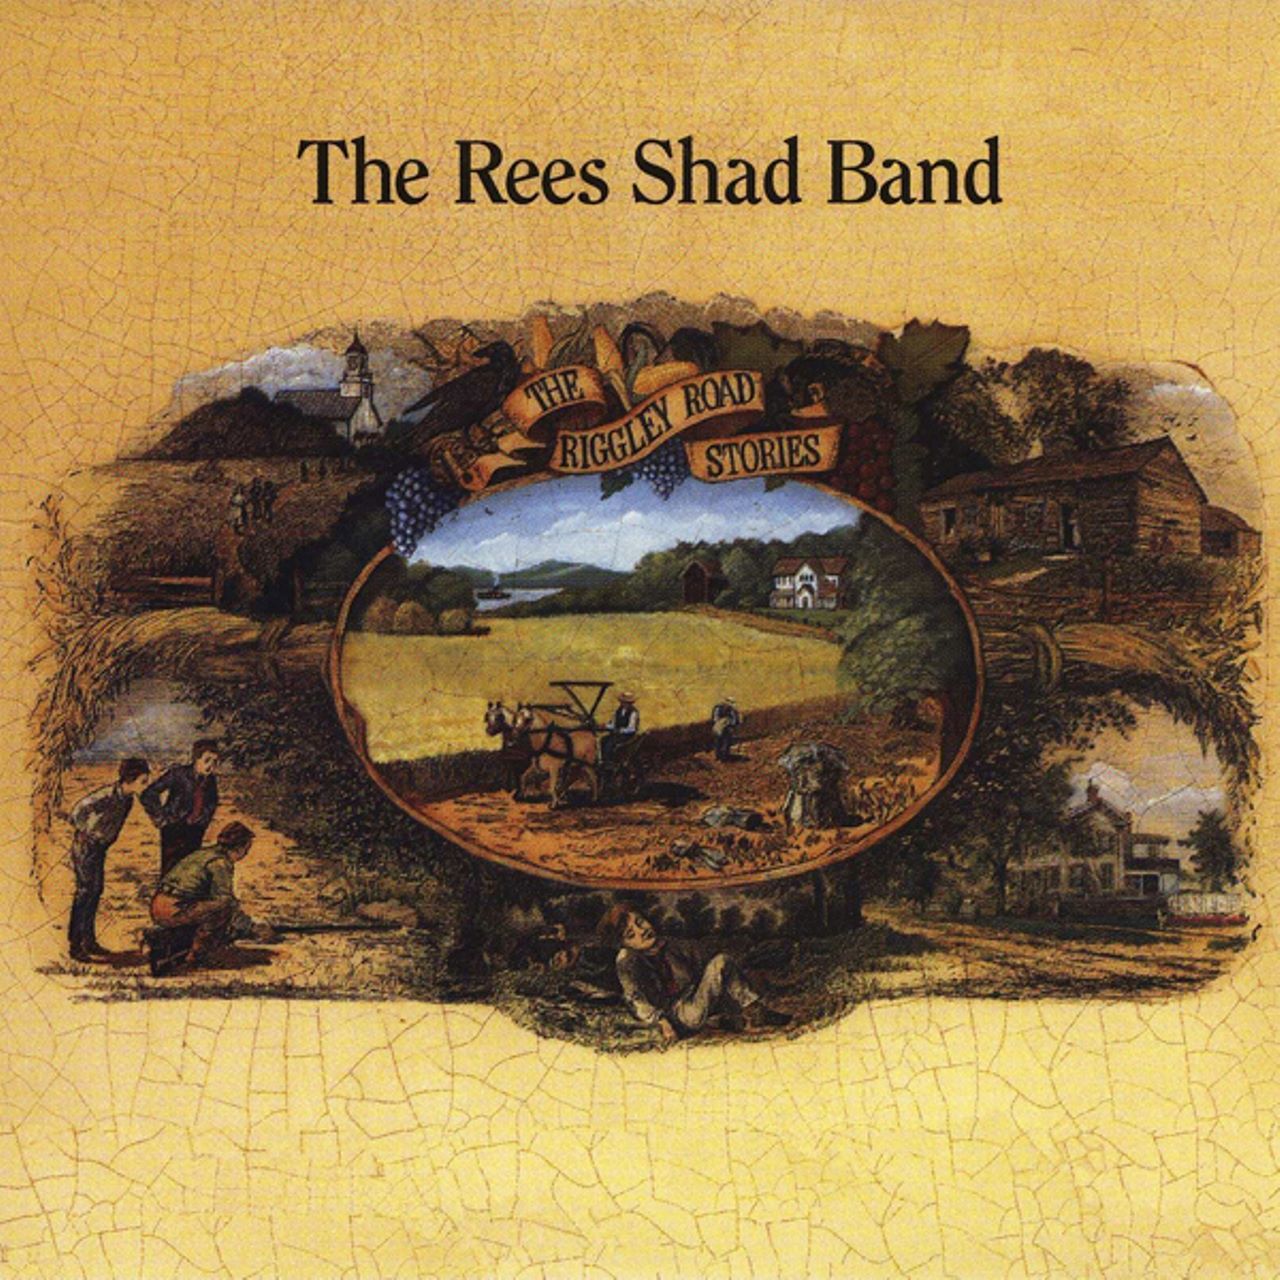 Rees Shad Band - The Riggley Road Stories cover album